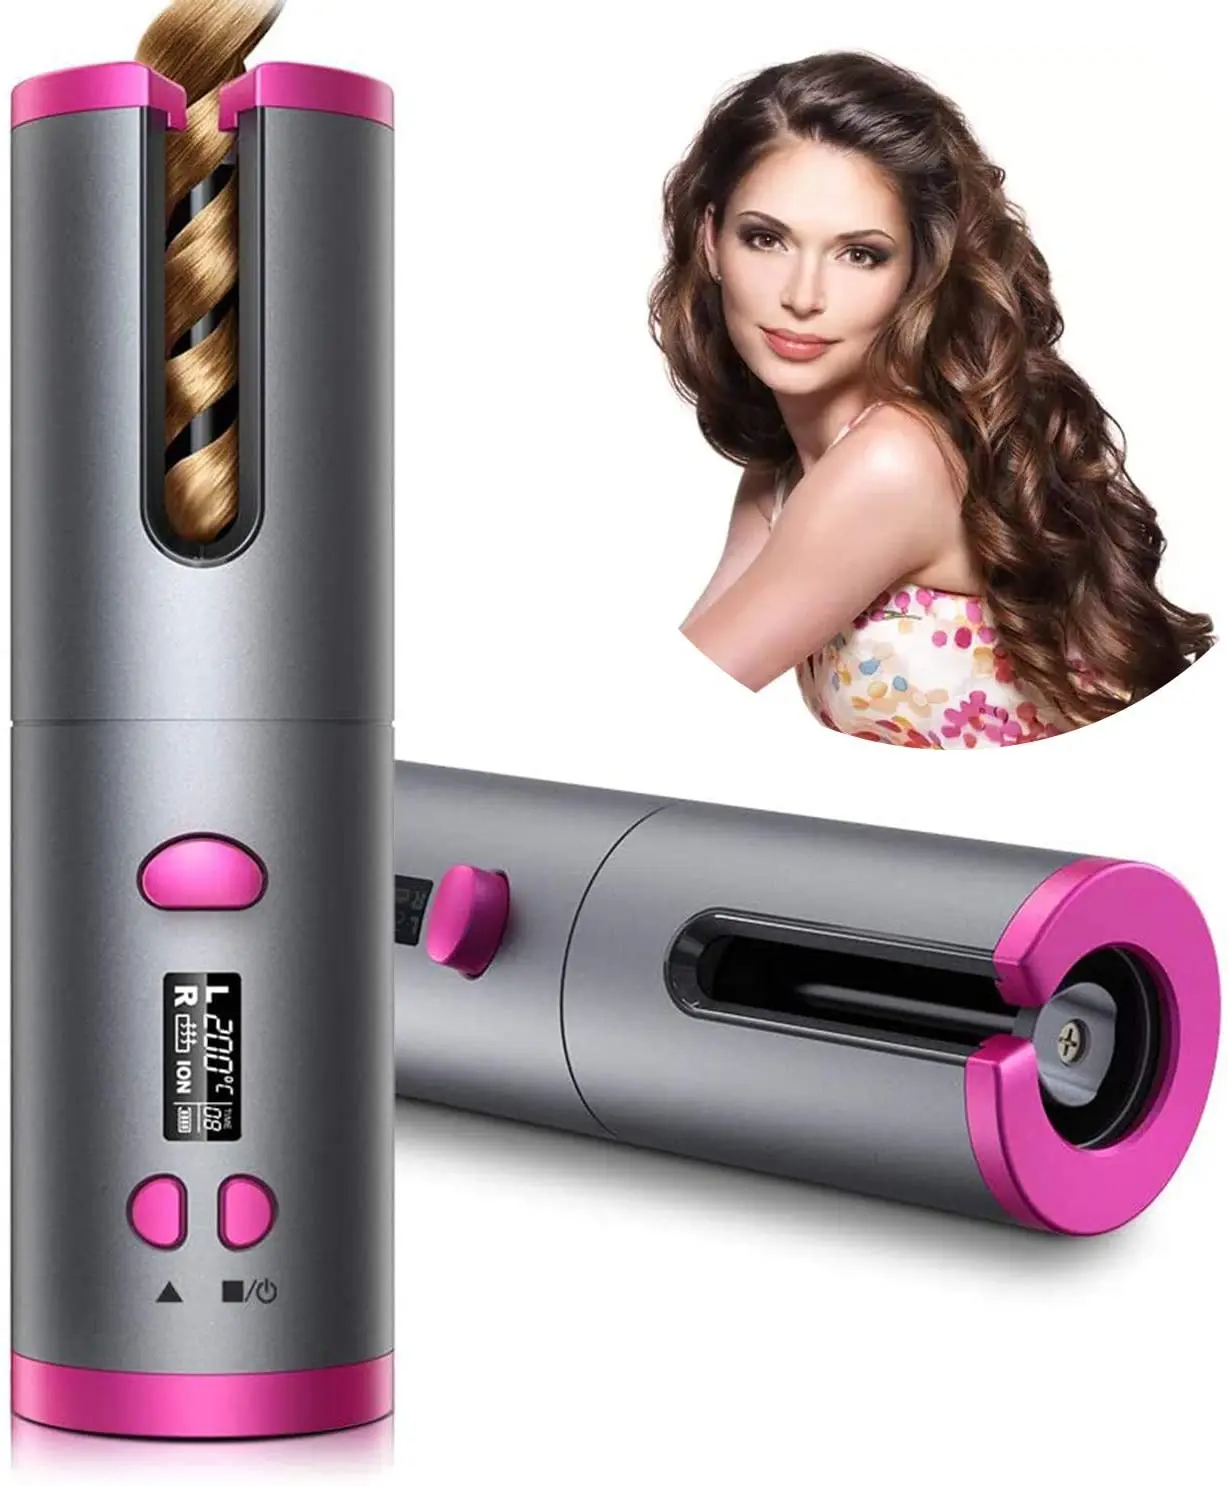 SEREED Cordless Auto Hair Curler, Curling Iron With LCD Display And  Adjustable Temperature, Portable USB Rechargeable Barrel Hair Curler Fast  Heating For Curls Or Waves | Automatic Curling Iron,cordless Auto,,portable  Rechargeable |